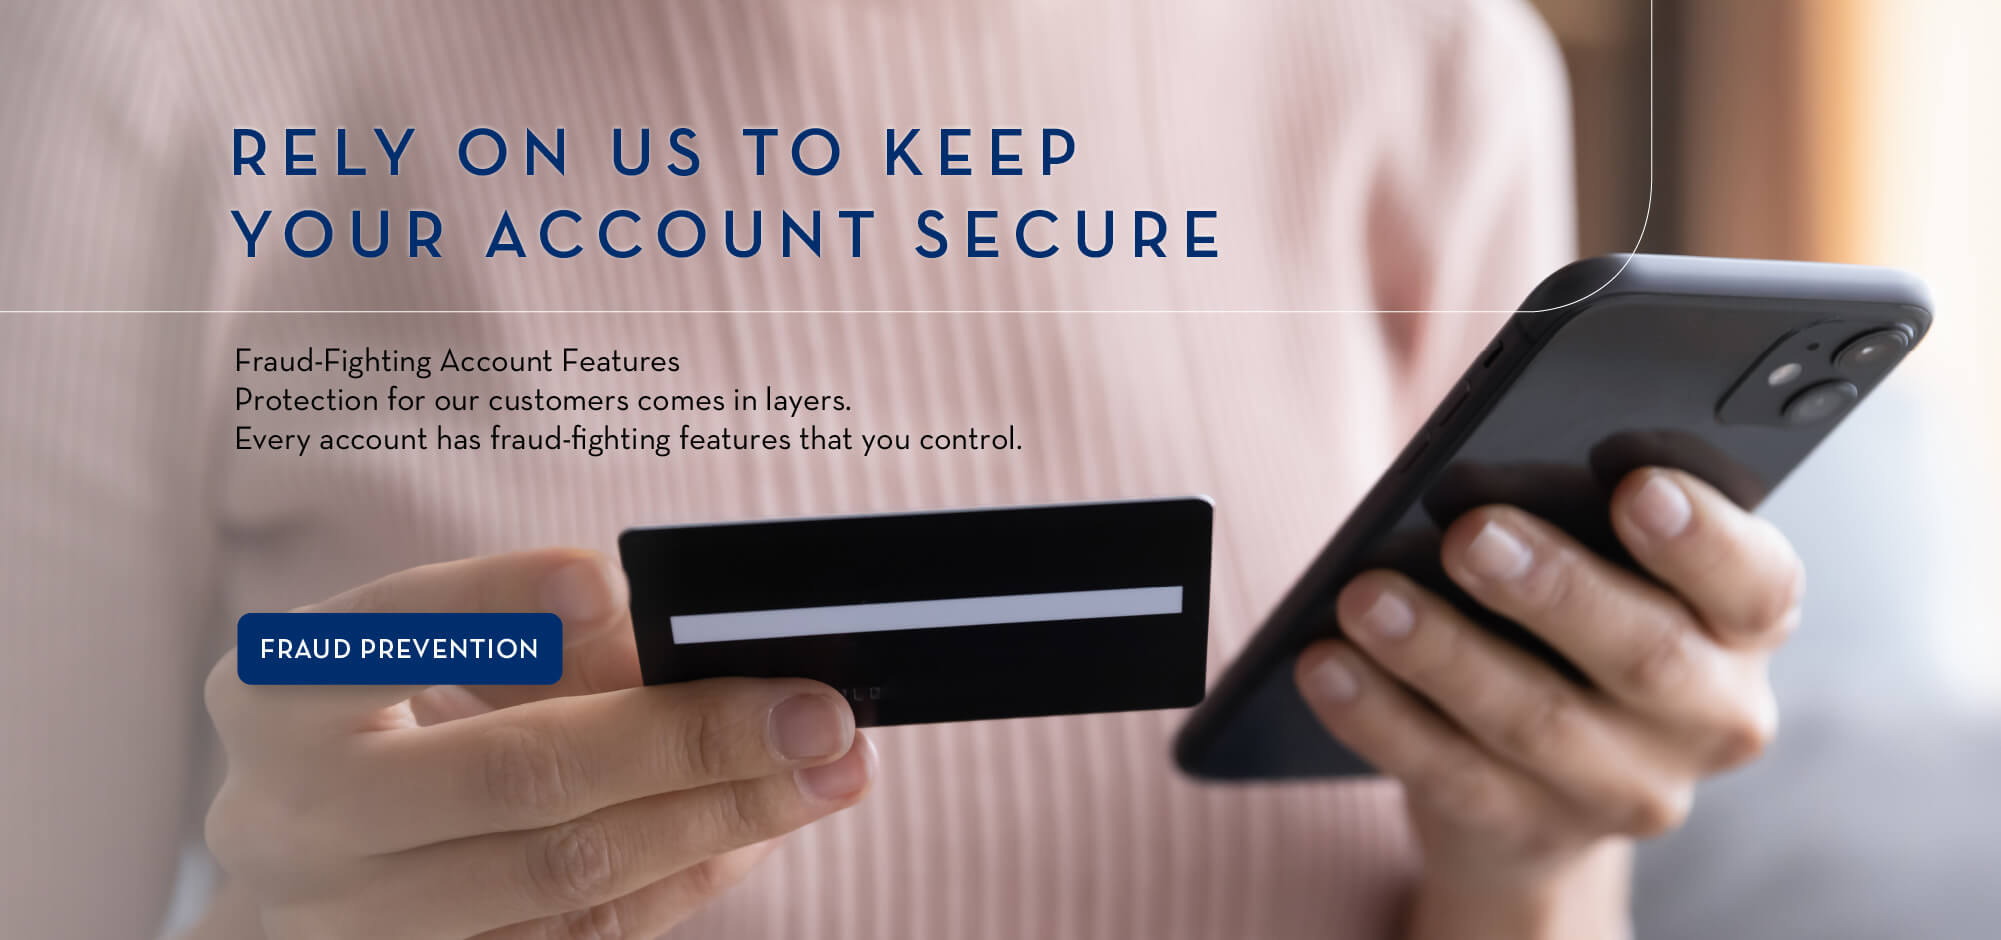 Rely on us to keep you account secure. Fraud-Fighting Account Features